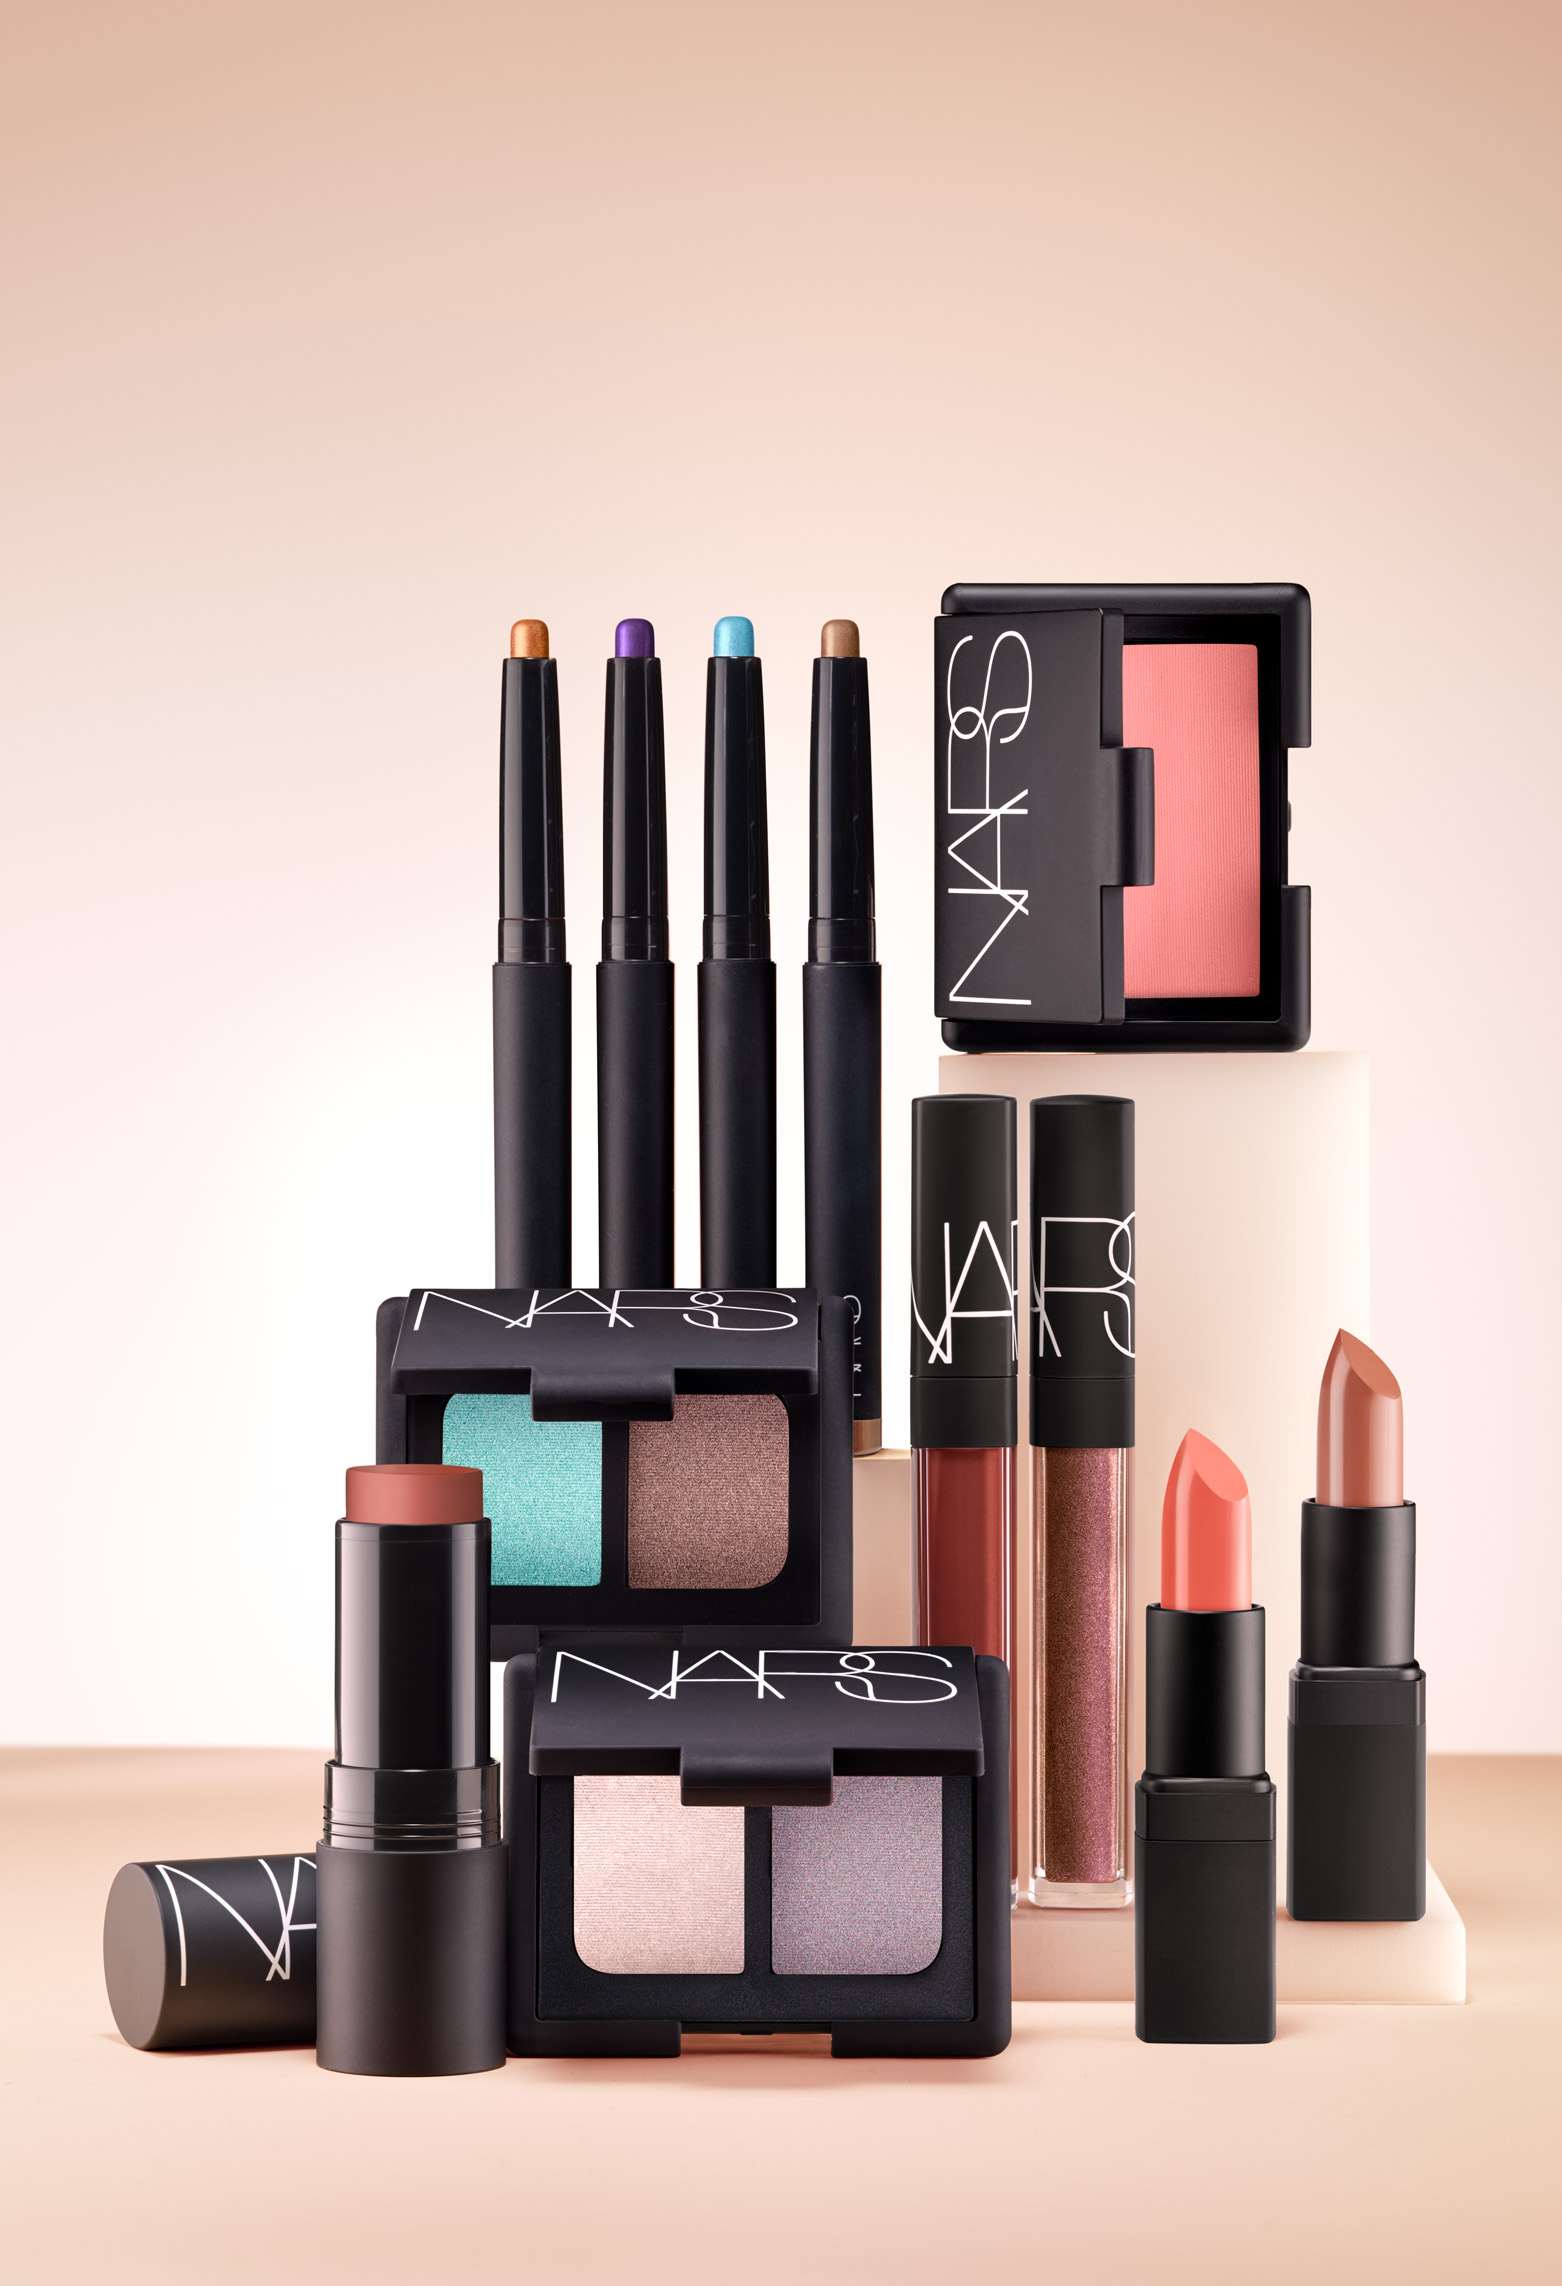 NARS Spring 2017 Color Collection Stylized Image - jpeg